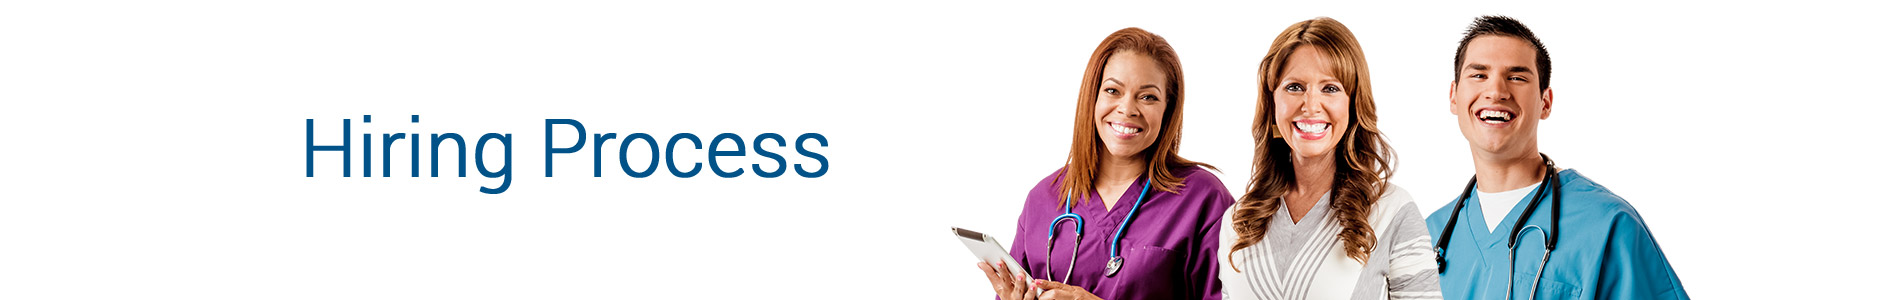 Healthcare - Hiring Process page banner